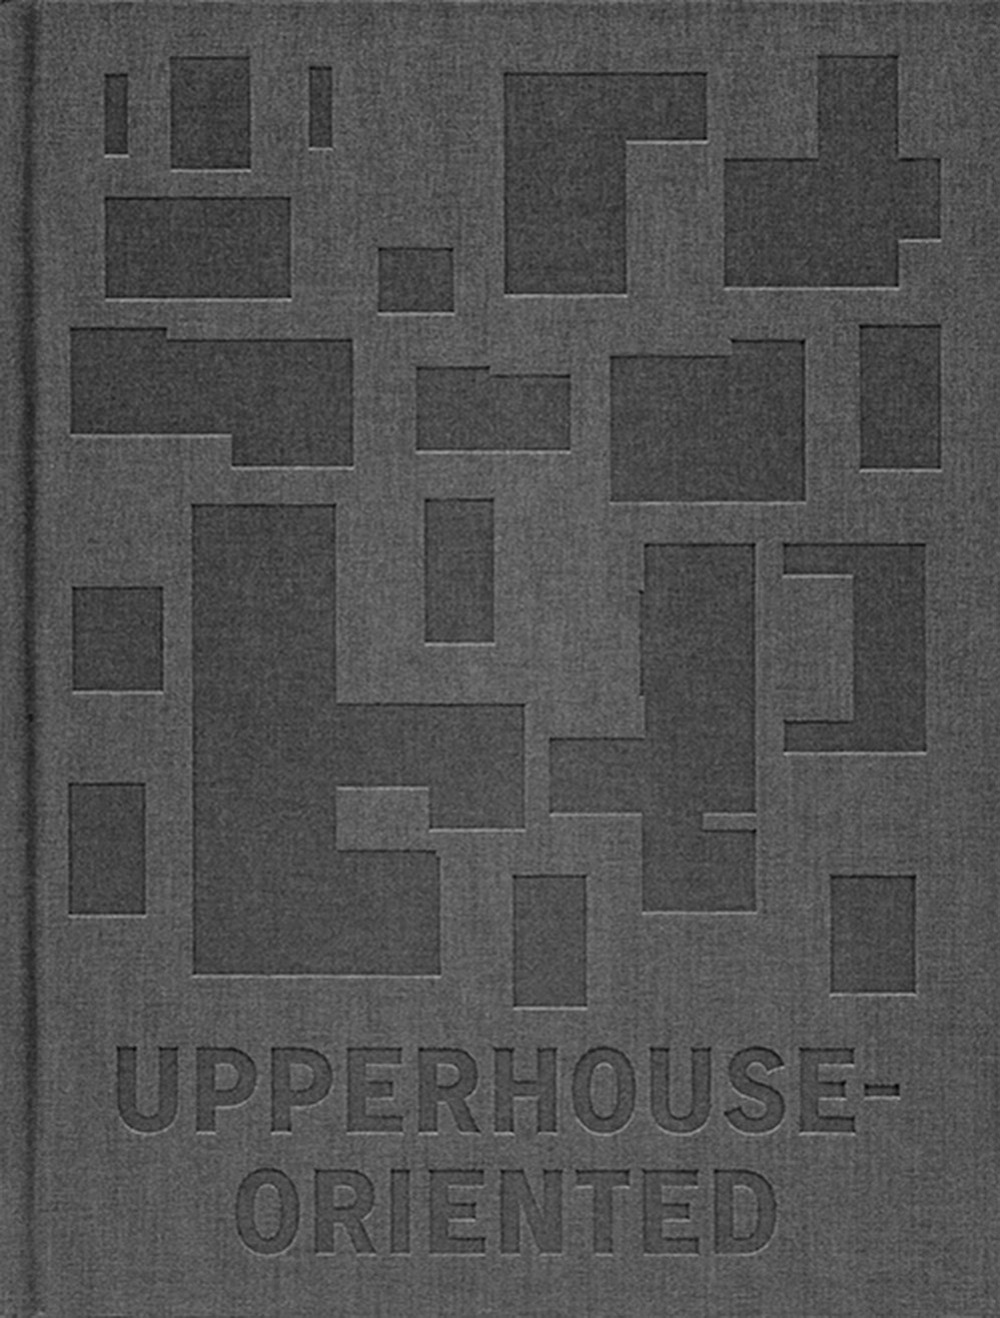 Upperhouse-Oriented · Midday